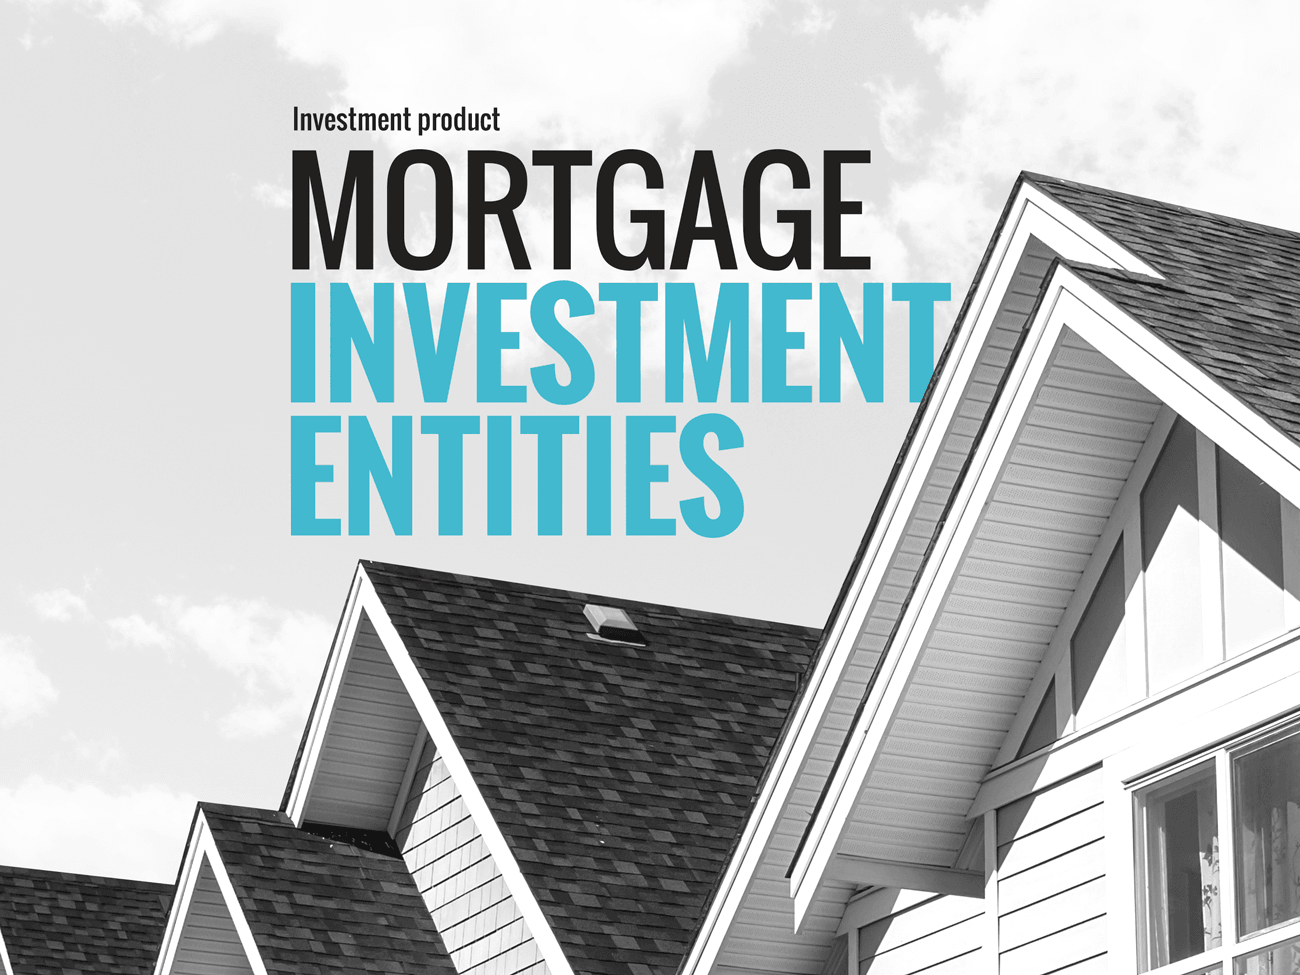 Investment product: Mortgage investment entities